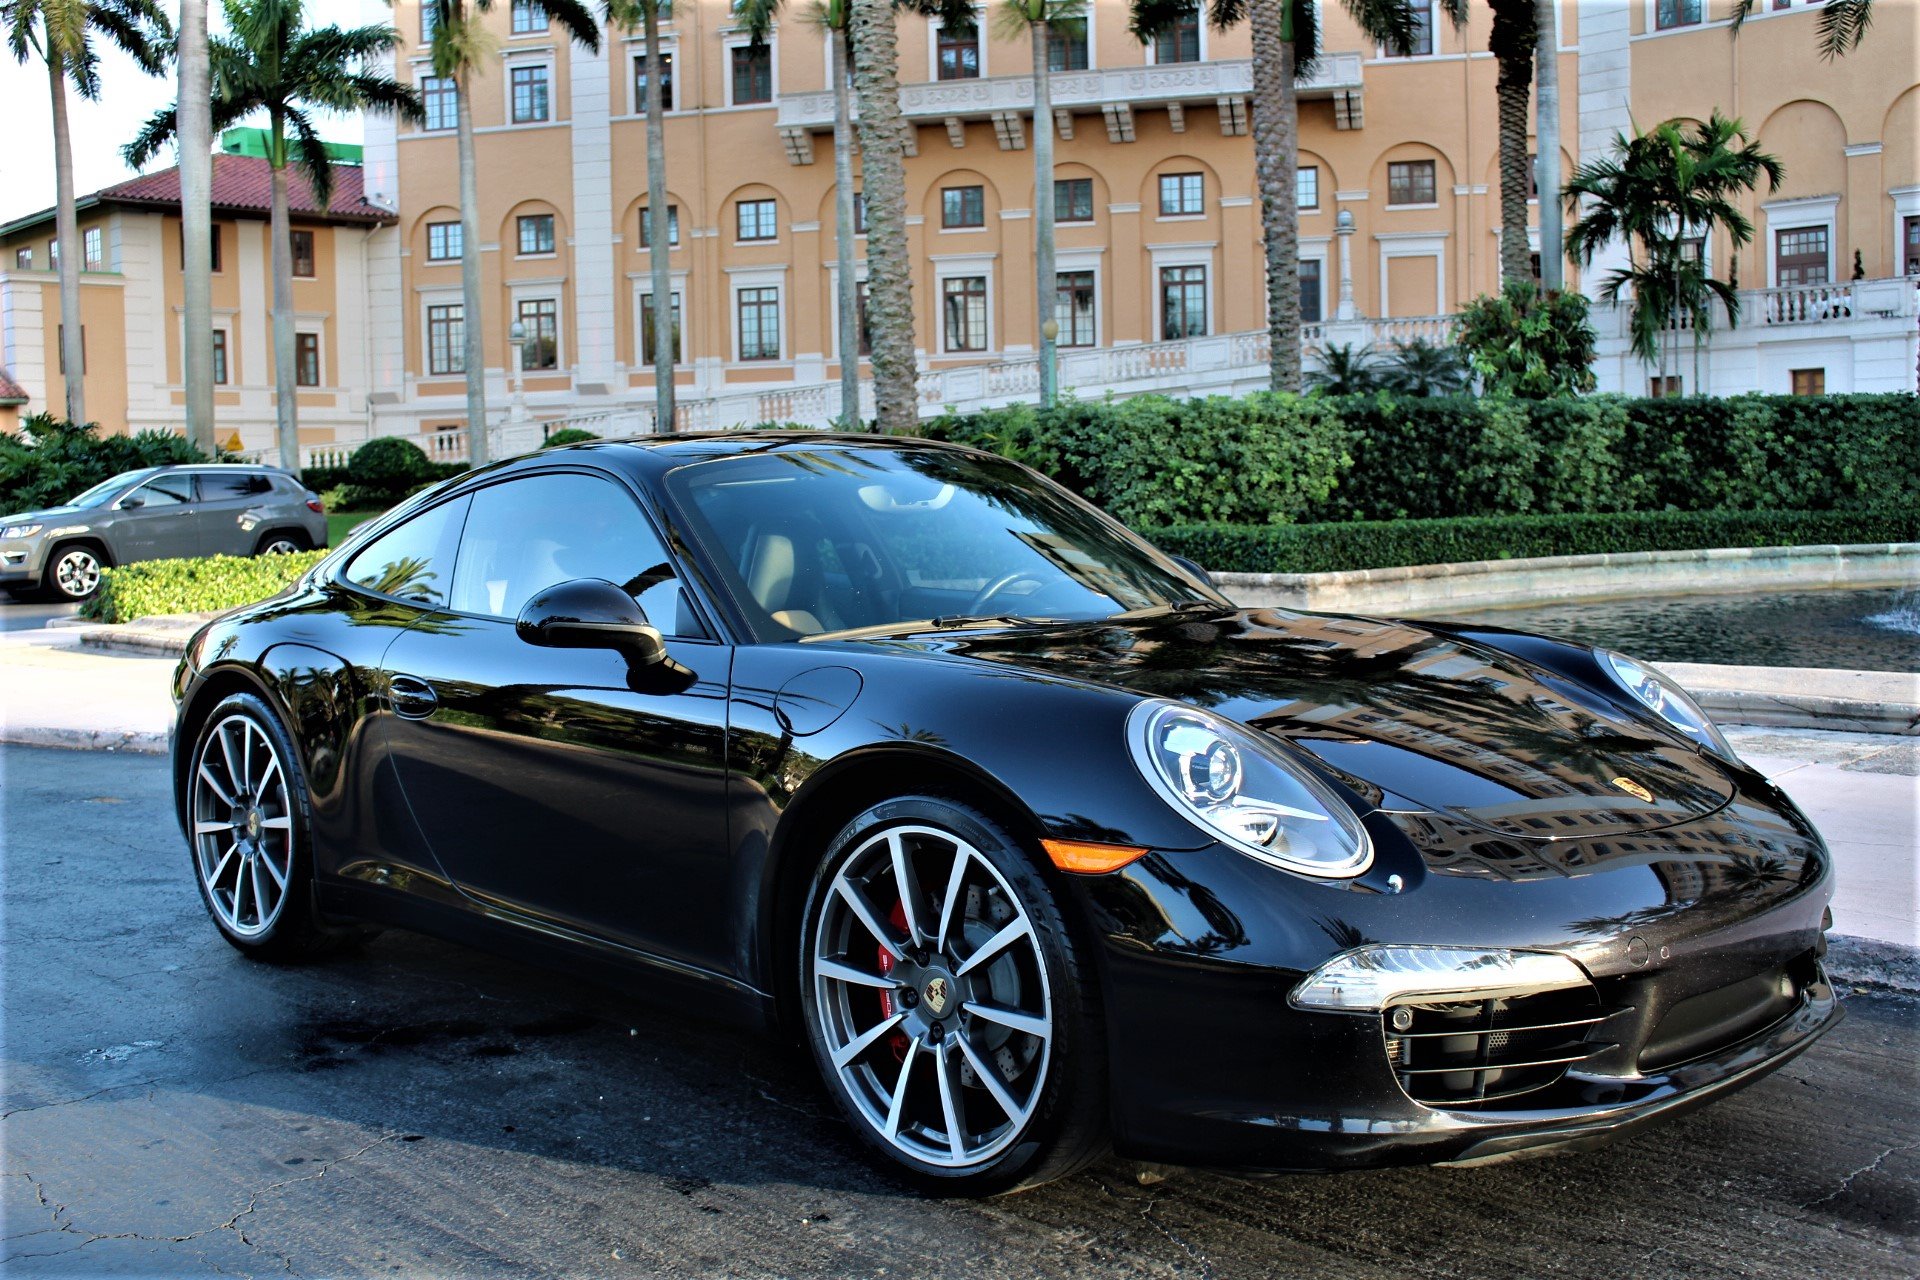 Used 2013 Porsche 911 Carrera S for sale Sold at The Gables Sports Cars in Miami FL 33146 2